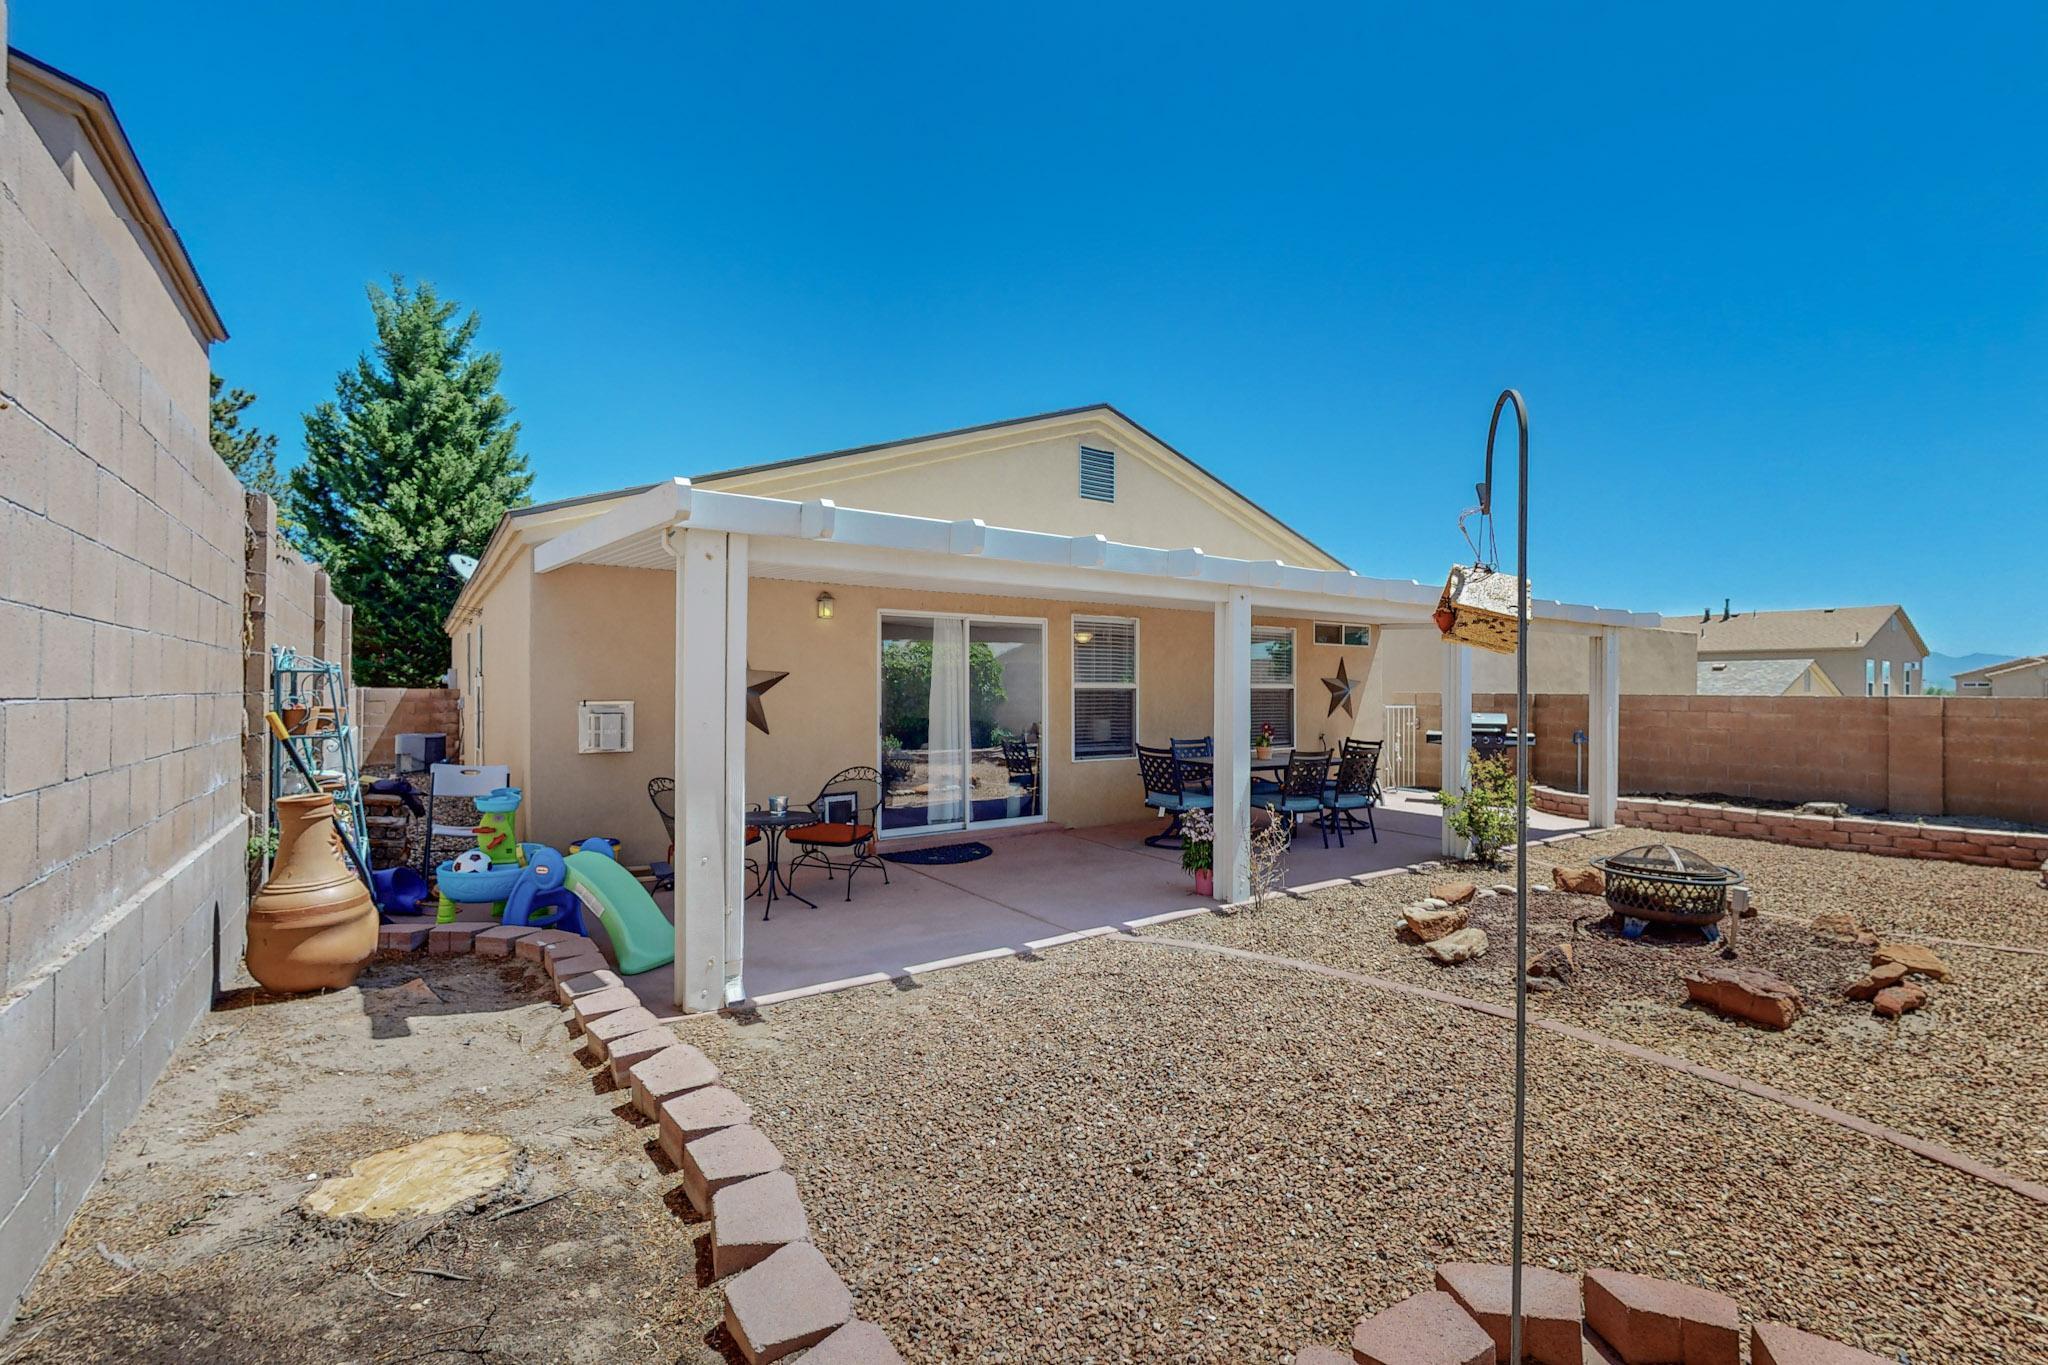 8211 Wolverine Drive NW, Albuquerque, New Mexico 87120, 3 Bedrooms Bedrooms, ,2 BathroomsBathrooms,Residential,For Sale,8211 Wolverine Drive NW,1061553